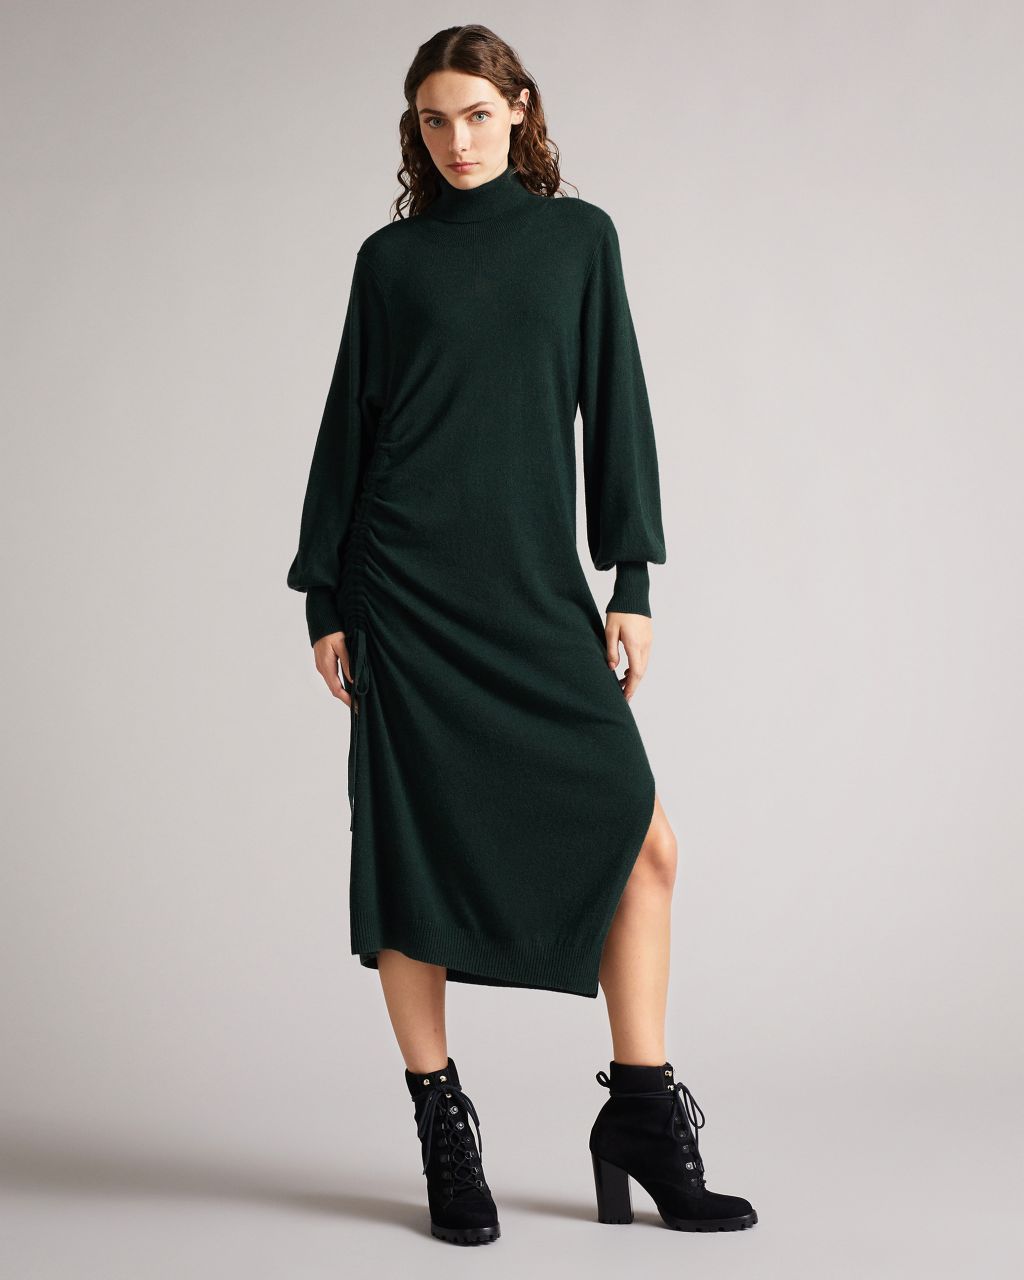 Ted Baker Women's Knitted Dress With Ruched Side Detail in Green, Aavvaa, Wool